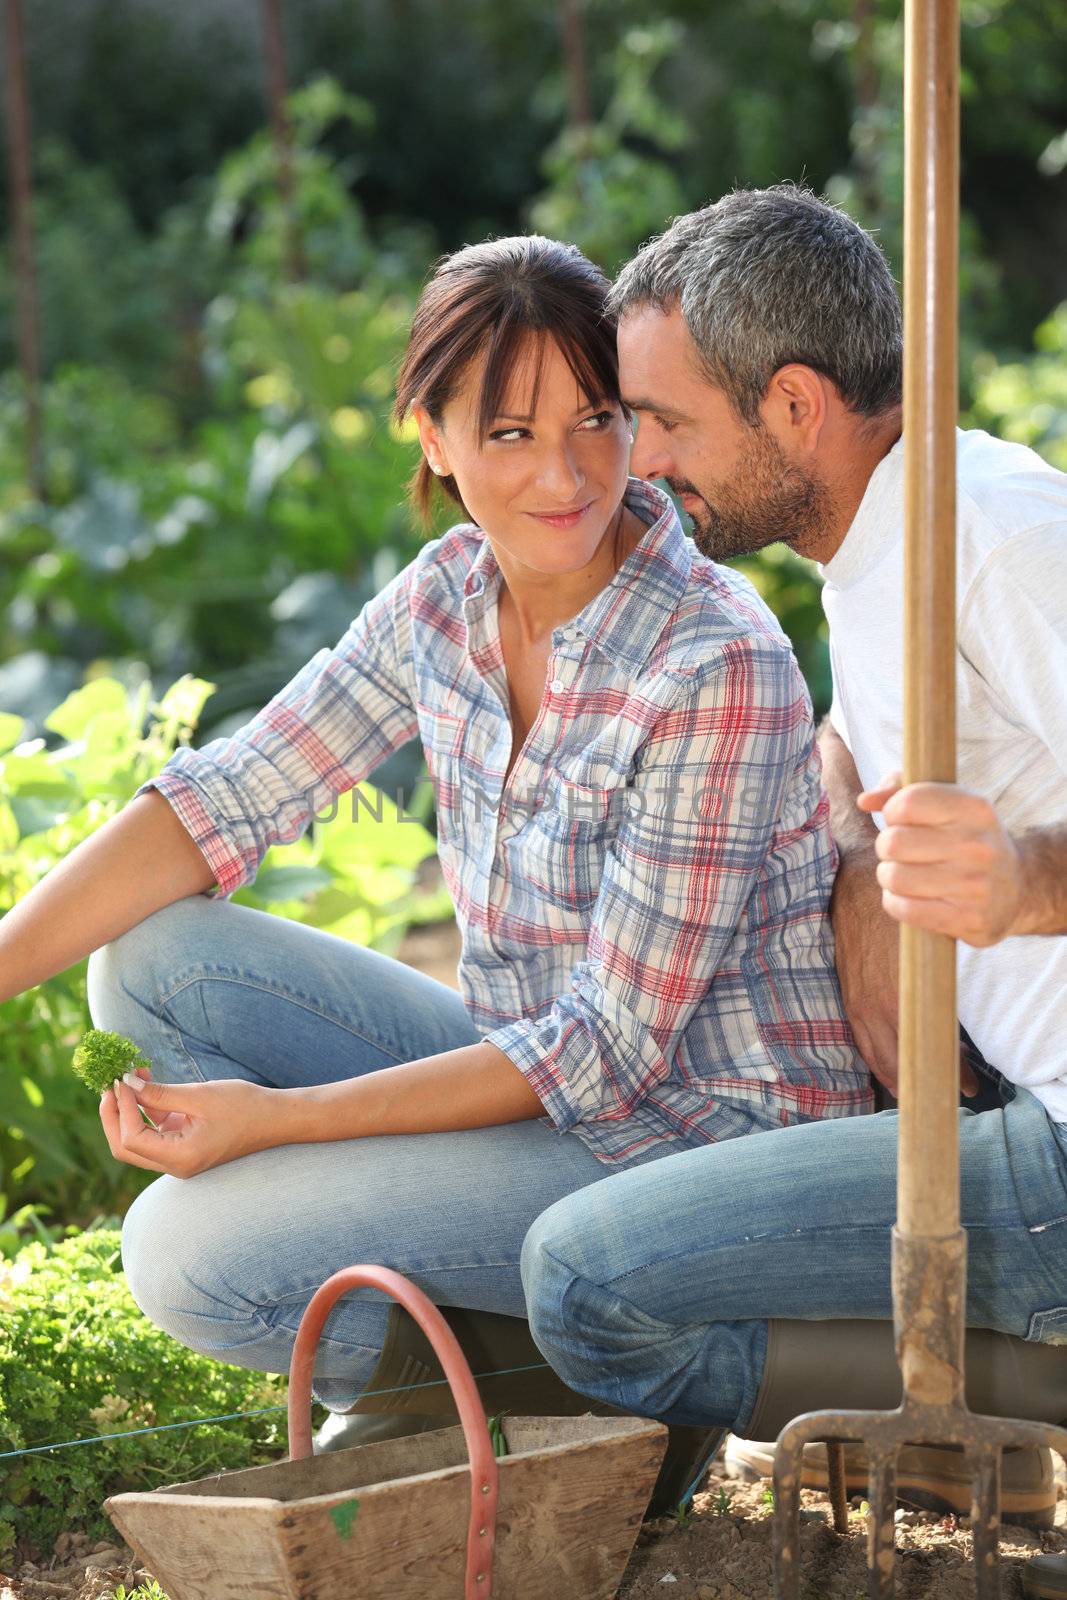 Romantic couple in an allotment by phovoir